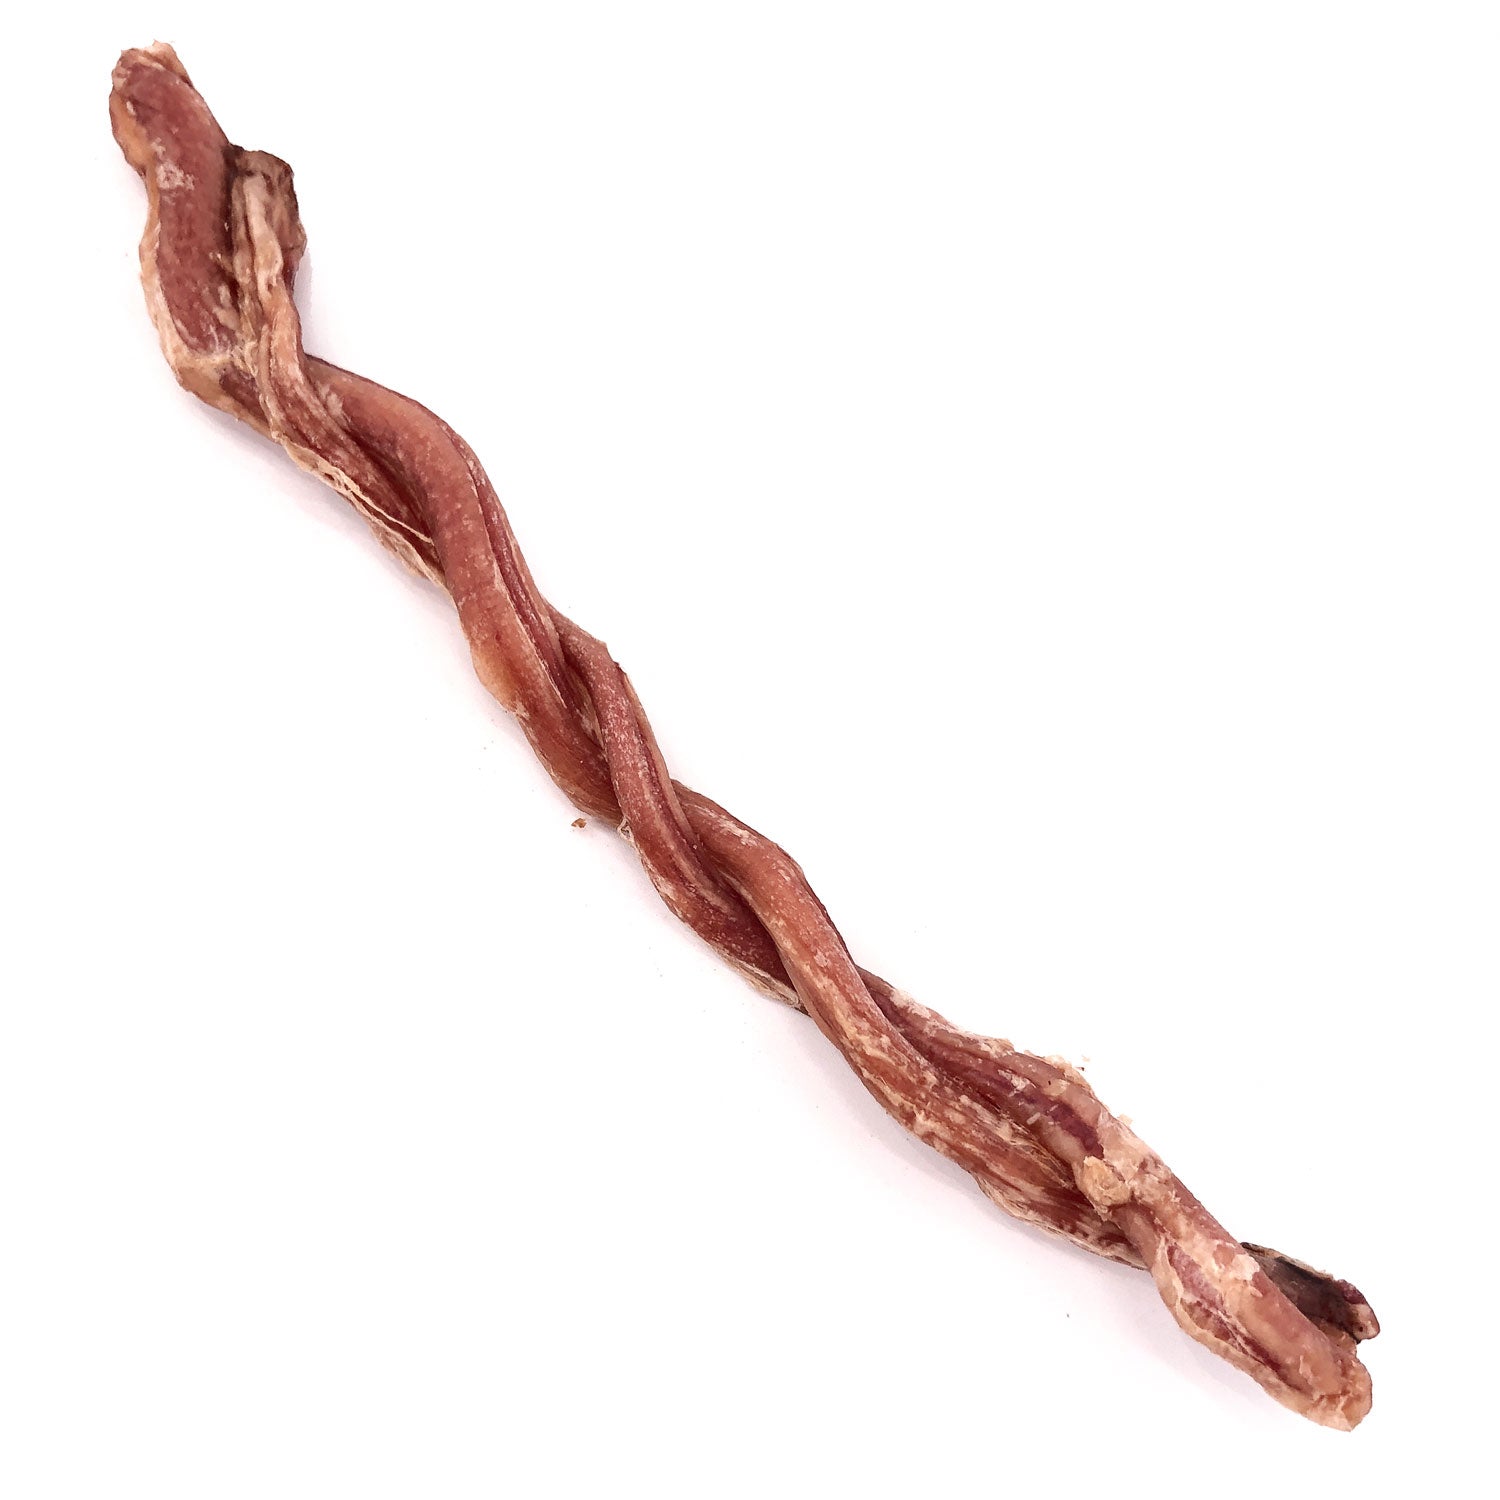 ValueBull USA Lamb Pizzle Twist Dog Chews, 6 Inch, 25 Count